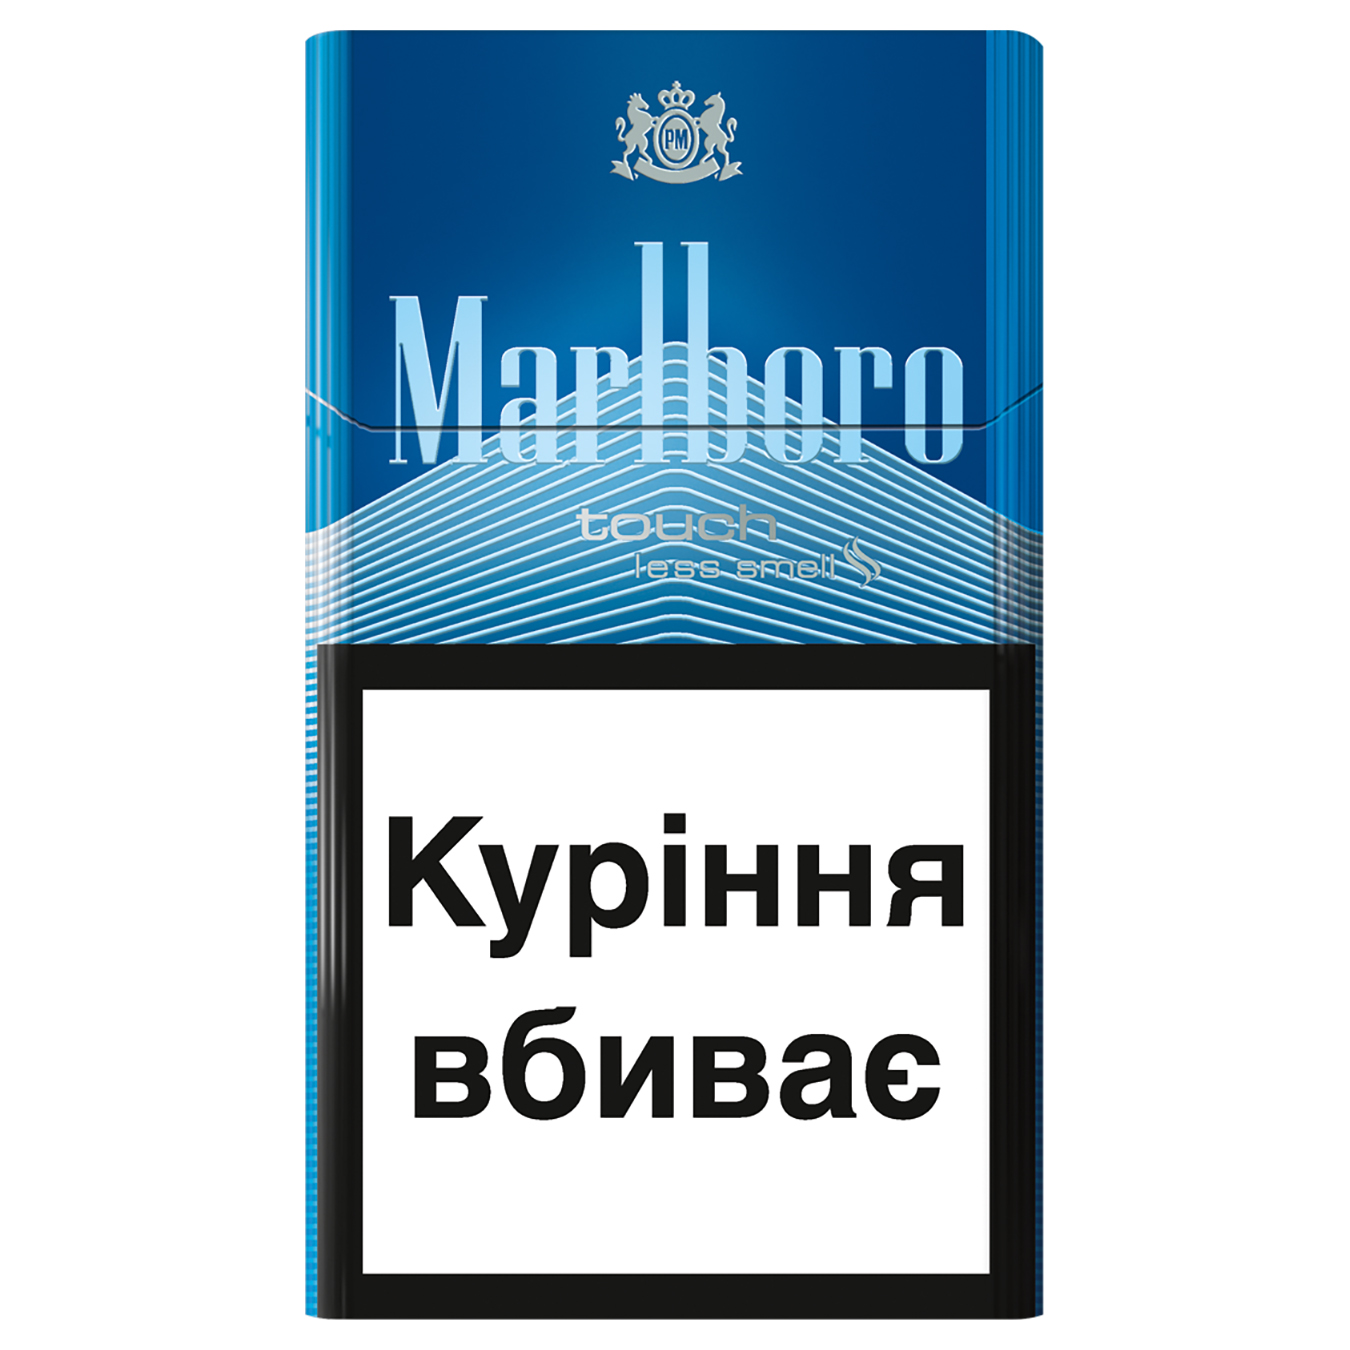 Marlboro Touch Cigarettes 20 pcs (the price is indicated without excise tax)